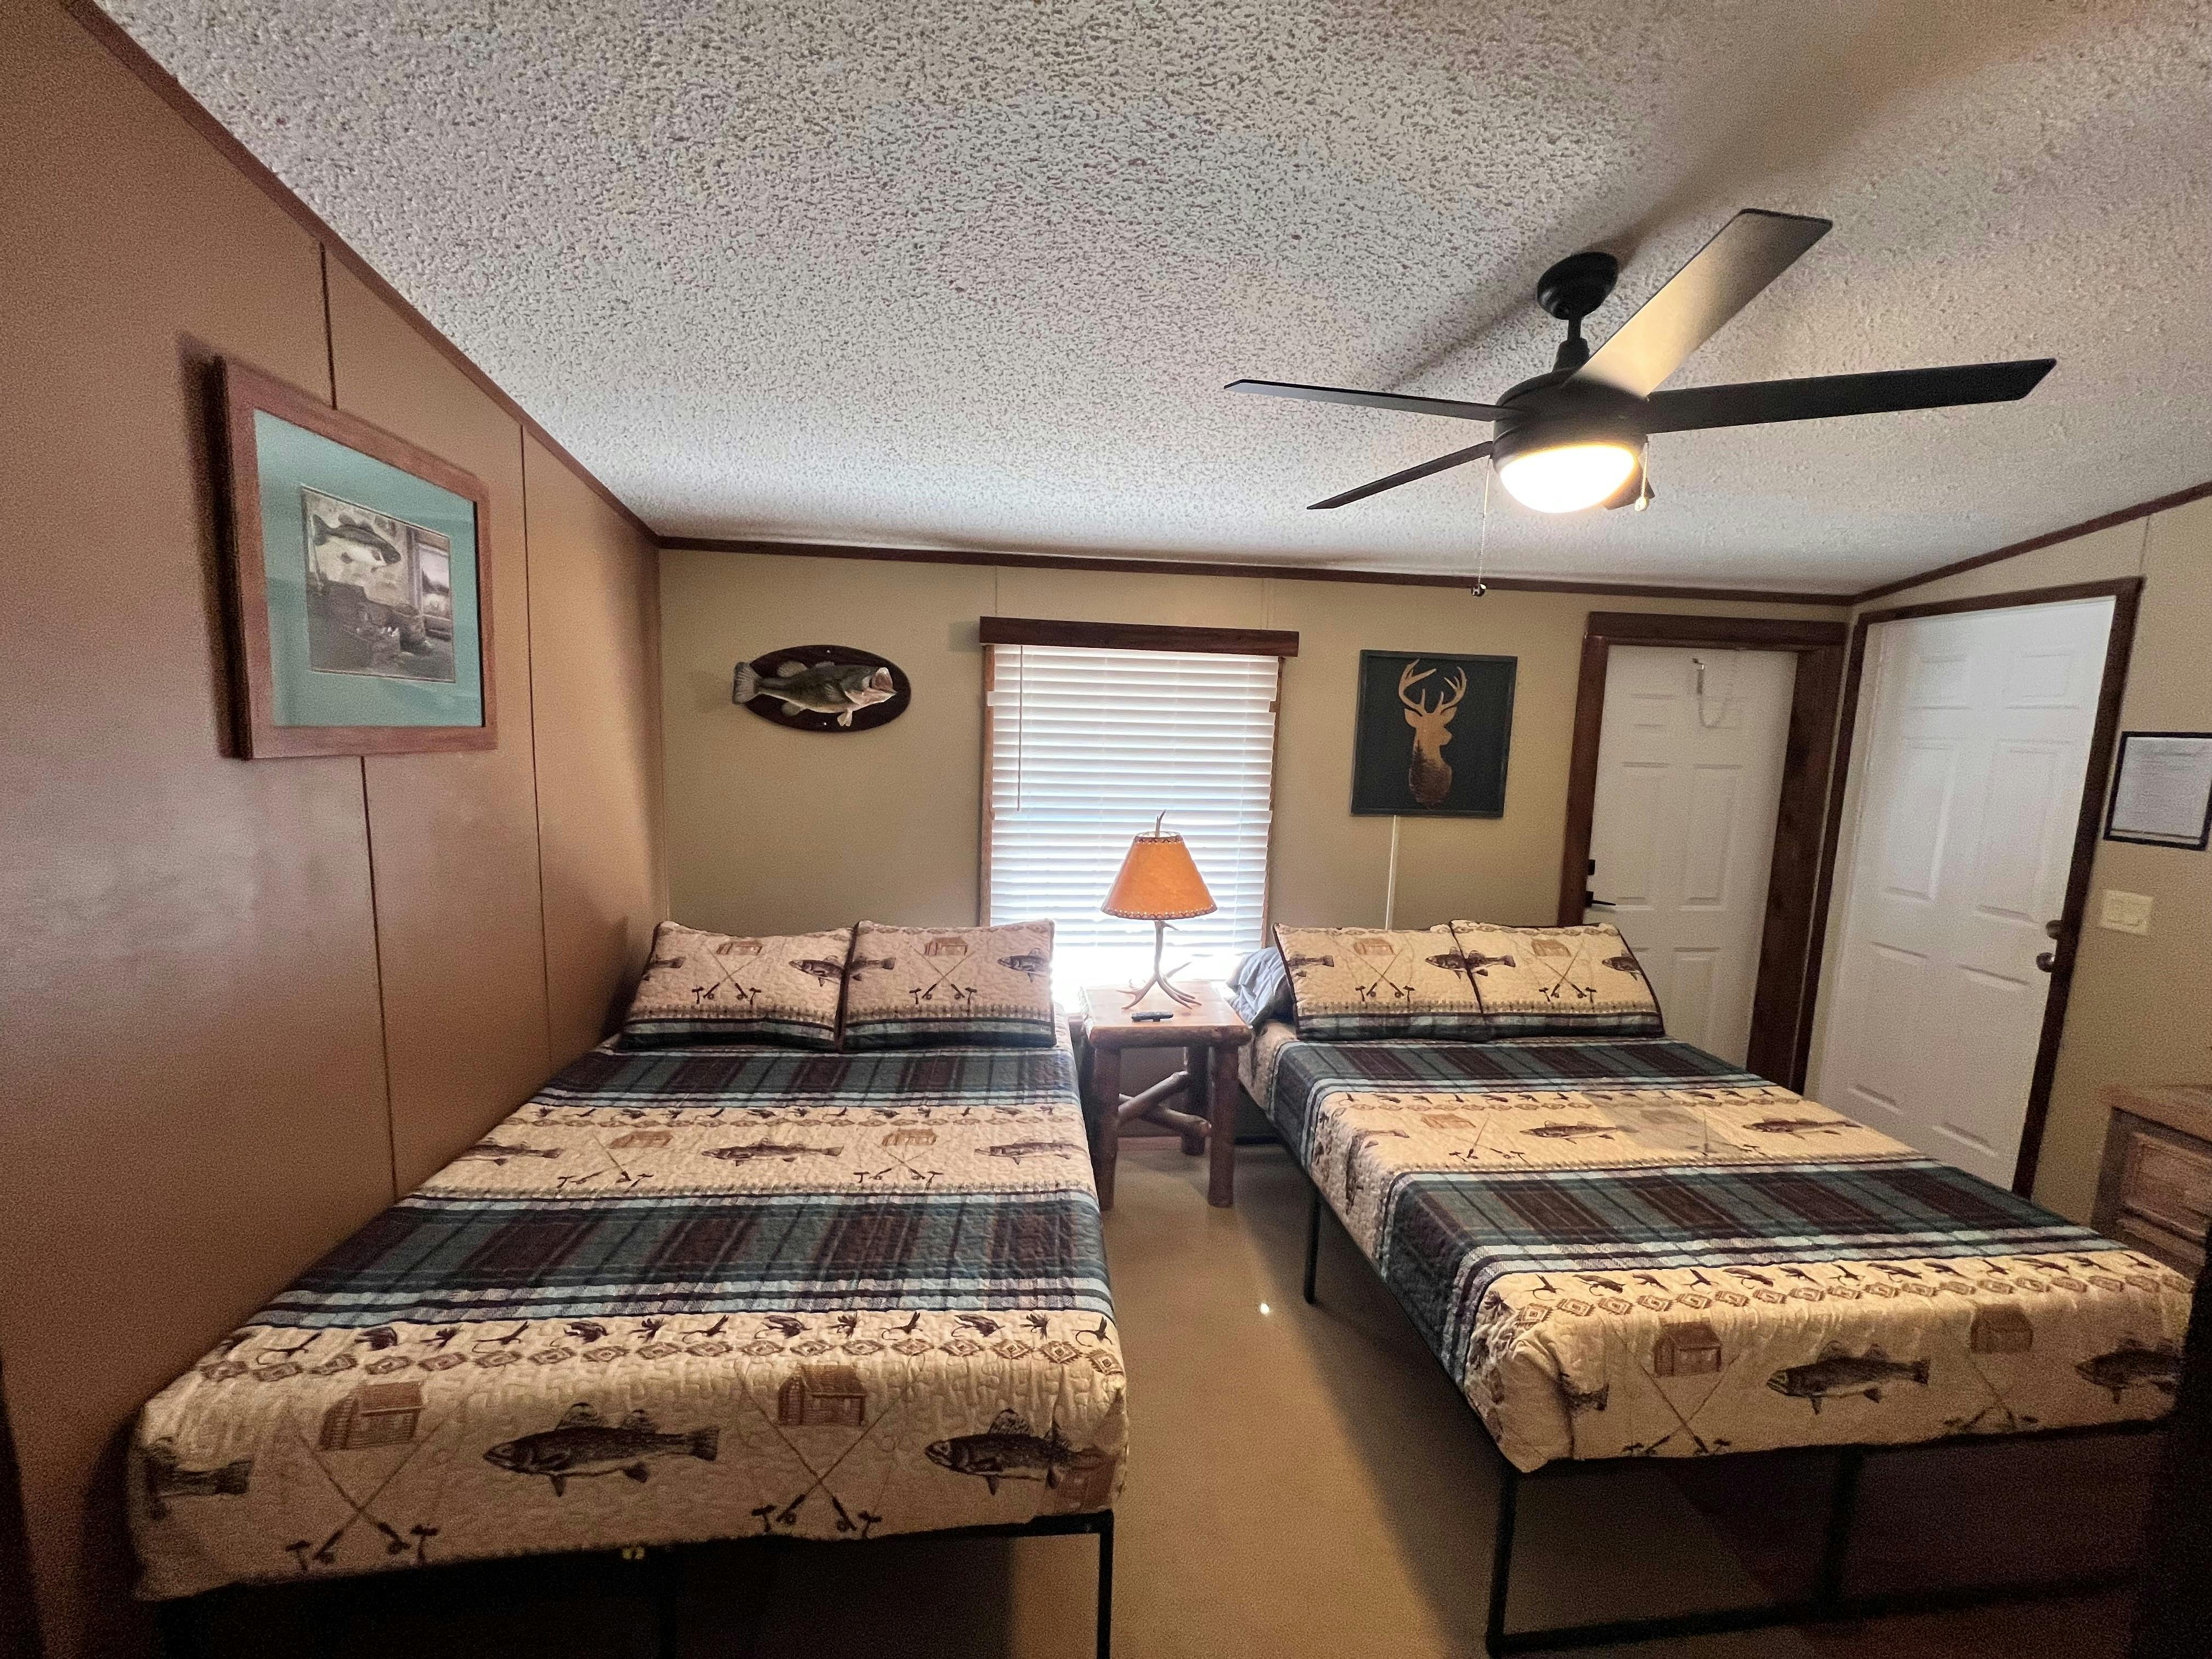 Gone Fishing and Hunting (2 Full Bed Suite w/kitchenette) - $119